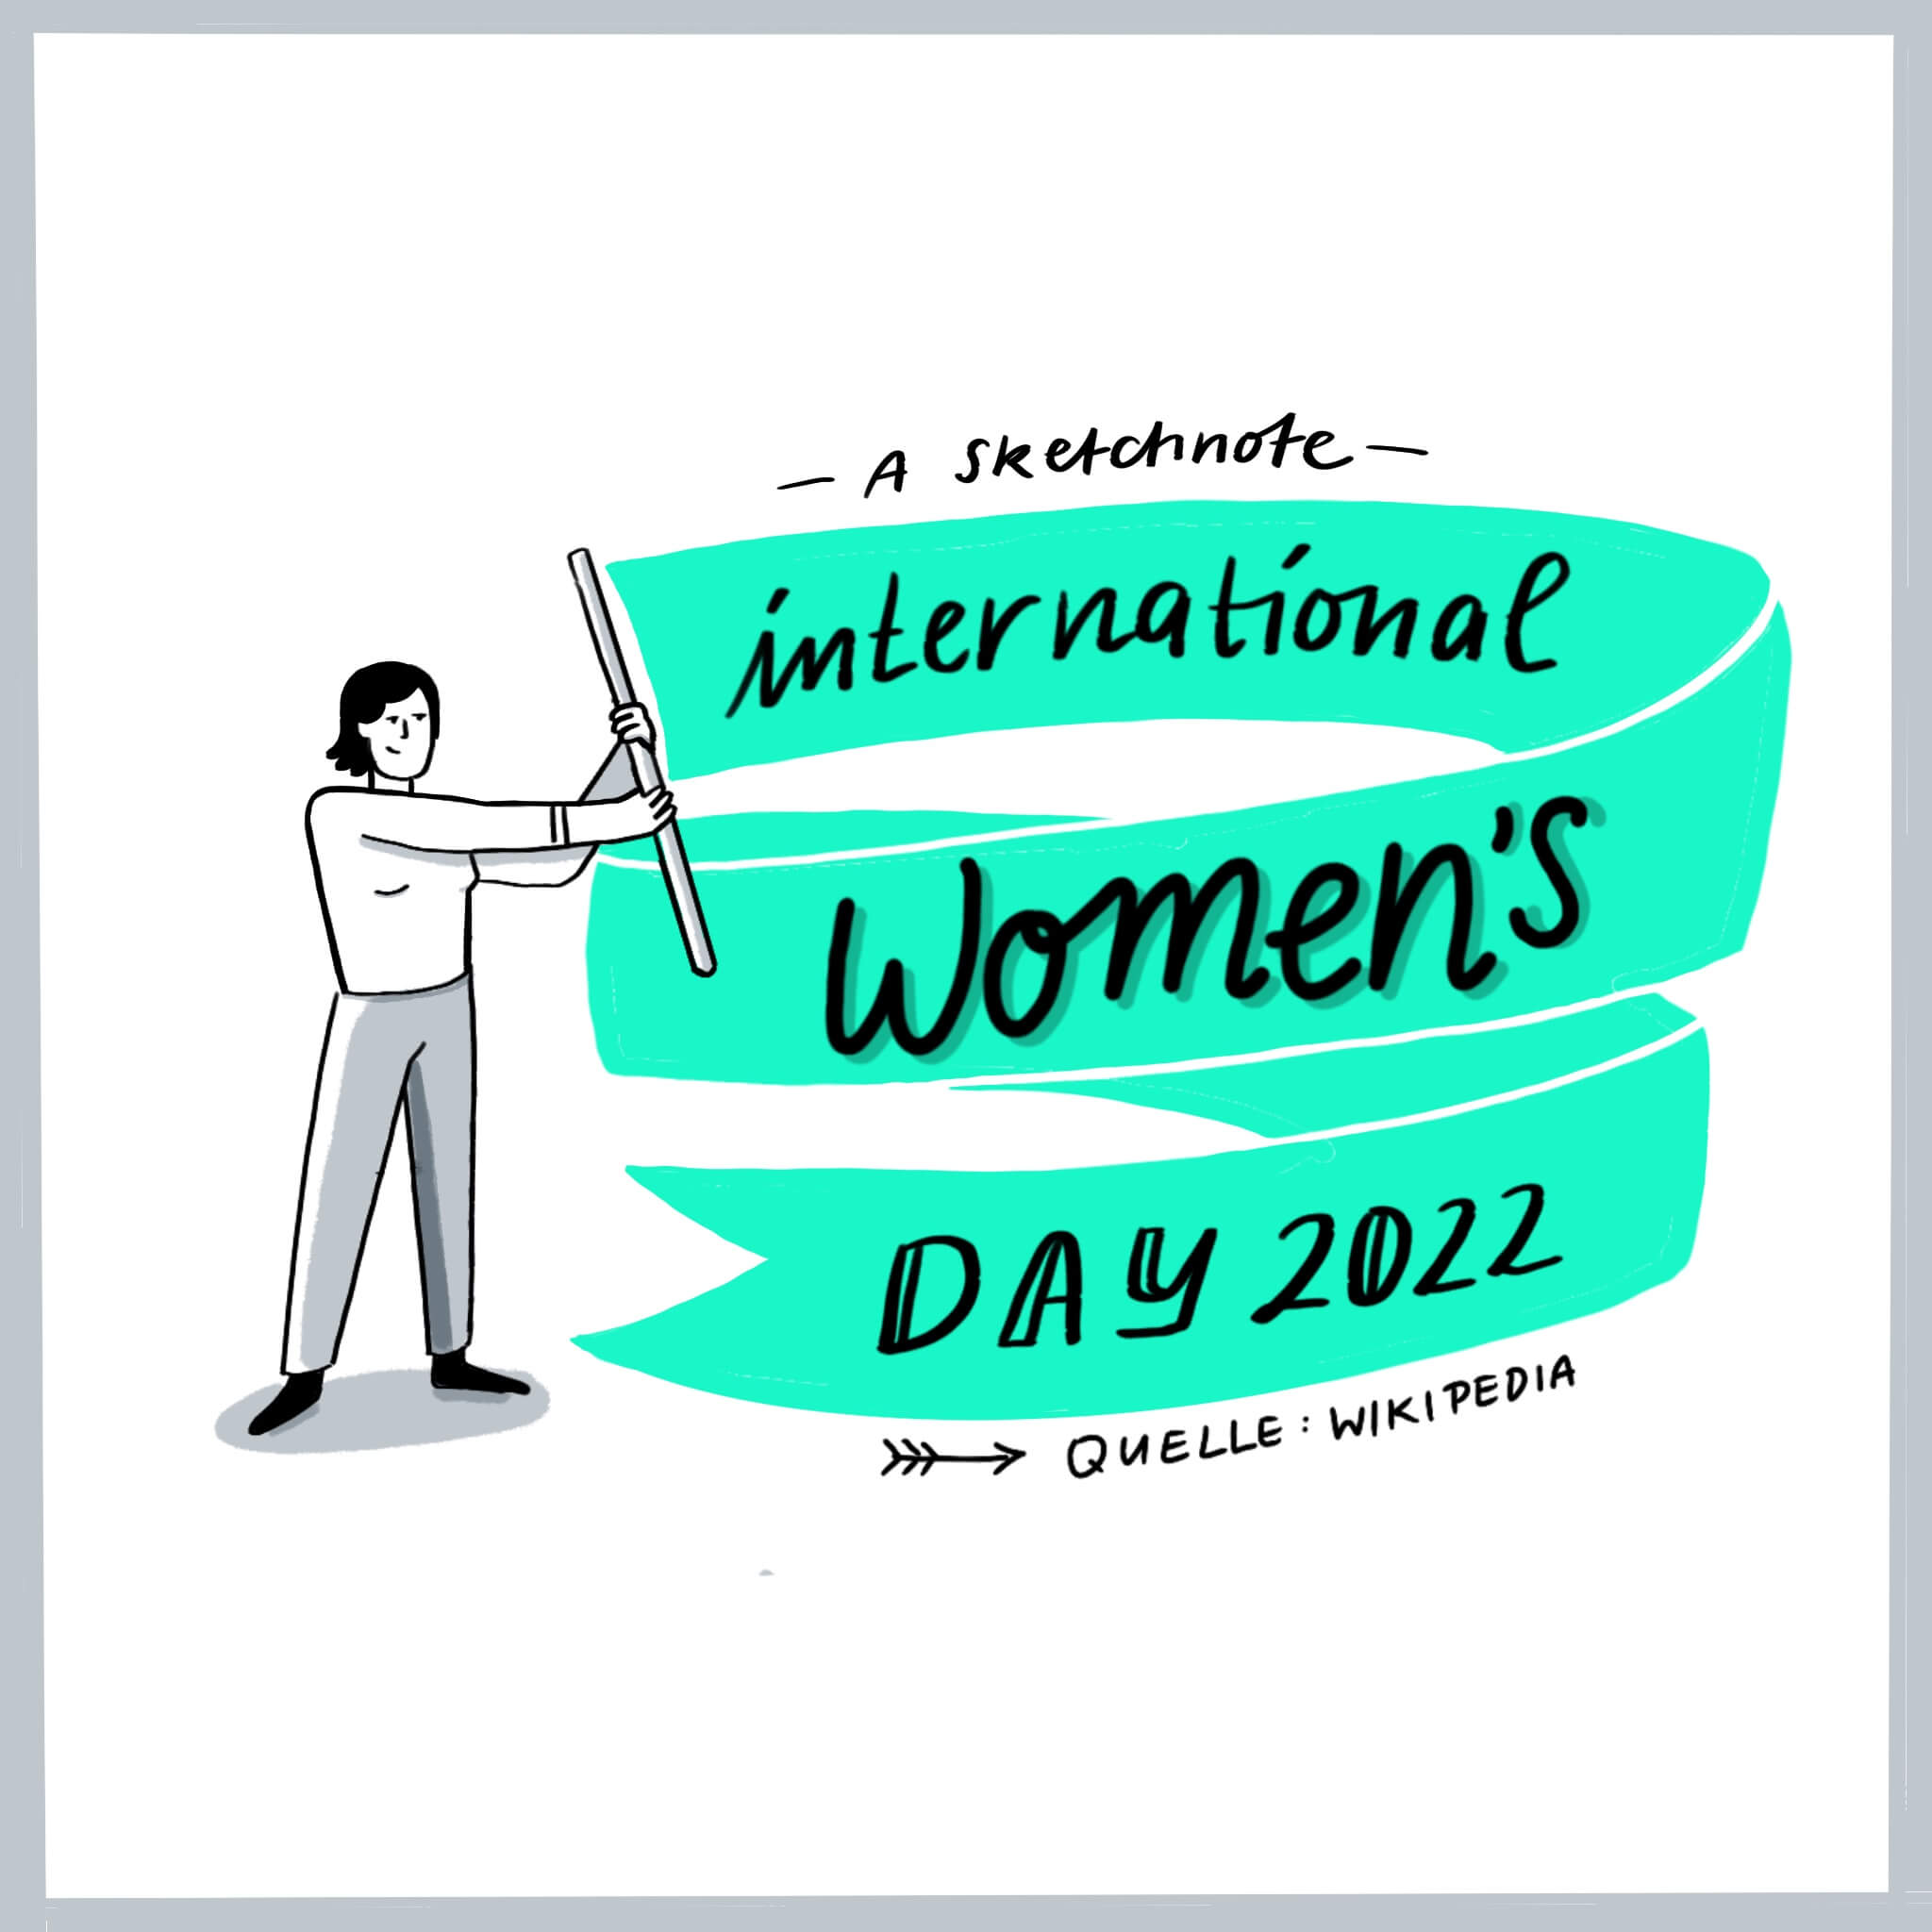 intro image about the international womens day